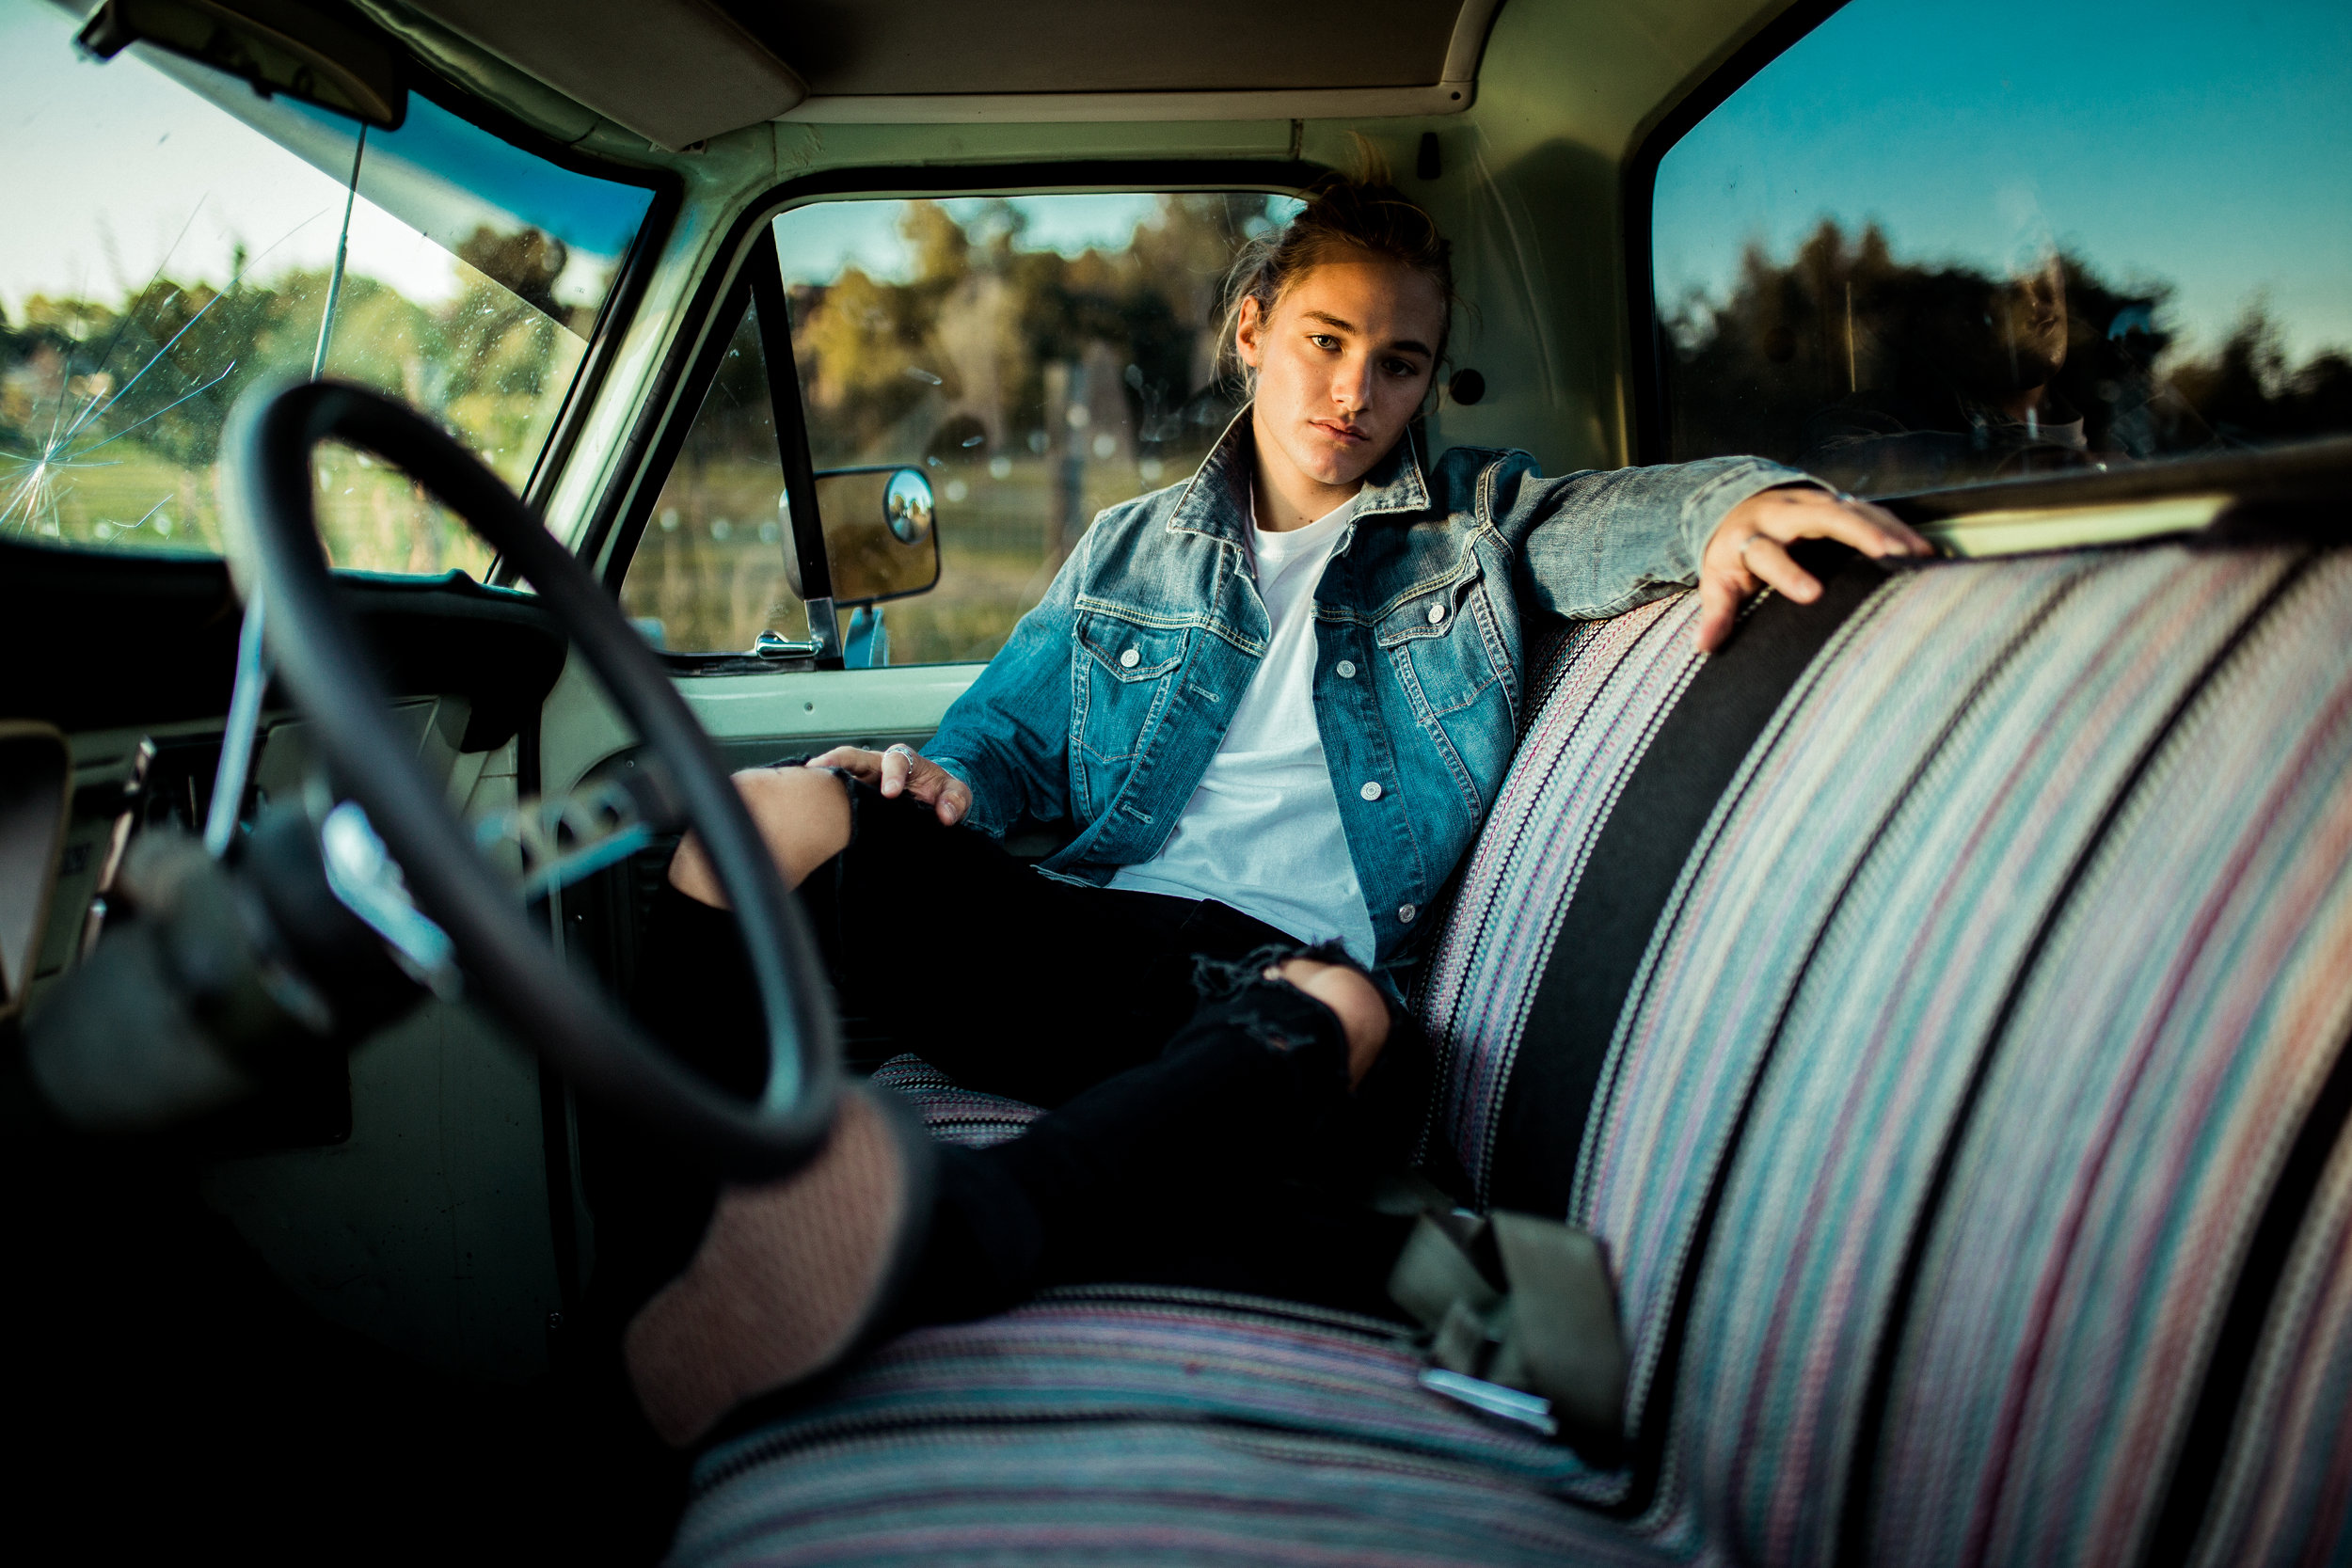  Did some lifestyle photos with Mitch Hoog and an old Ford truck. Another moment during the year I felt my work processing. Looking forward to doing more of this work next year. 